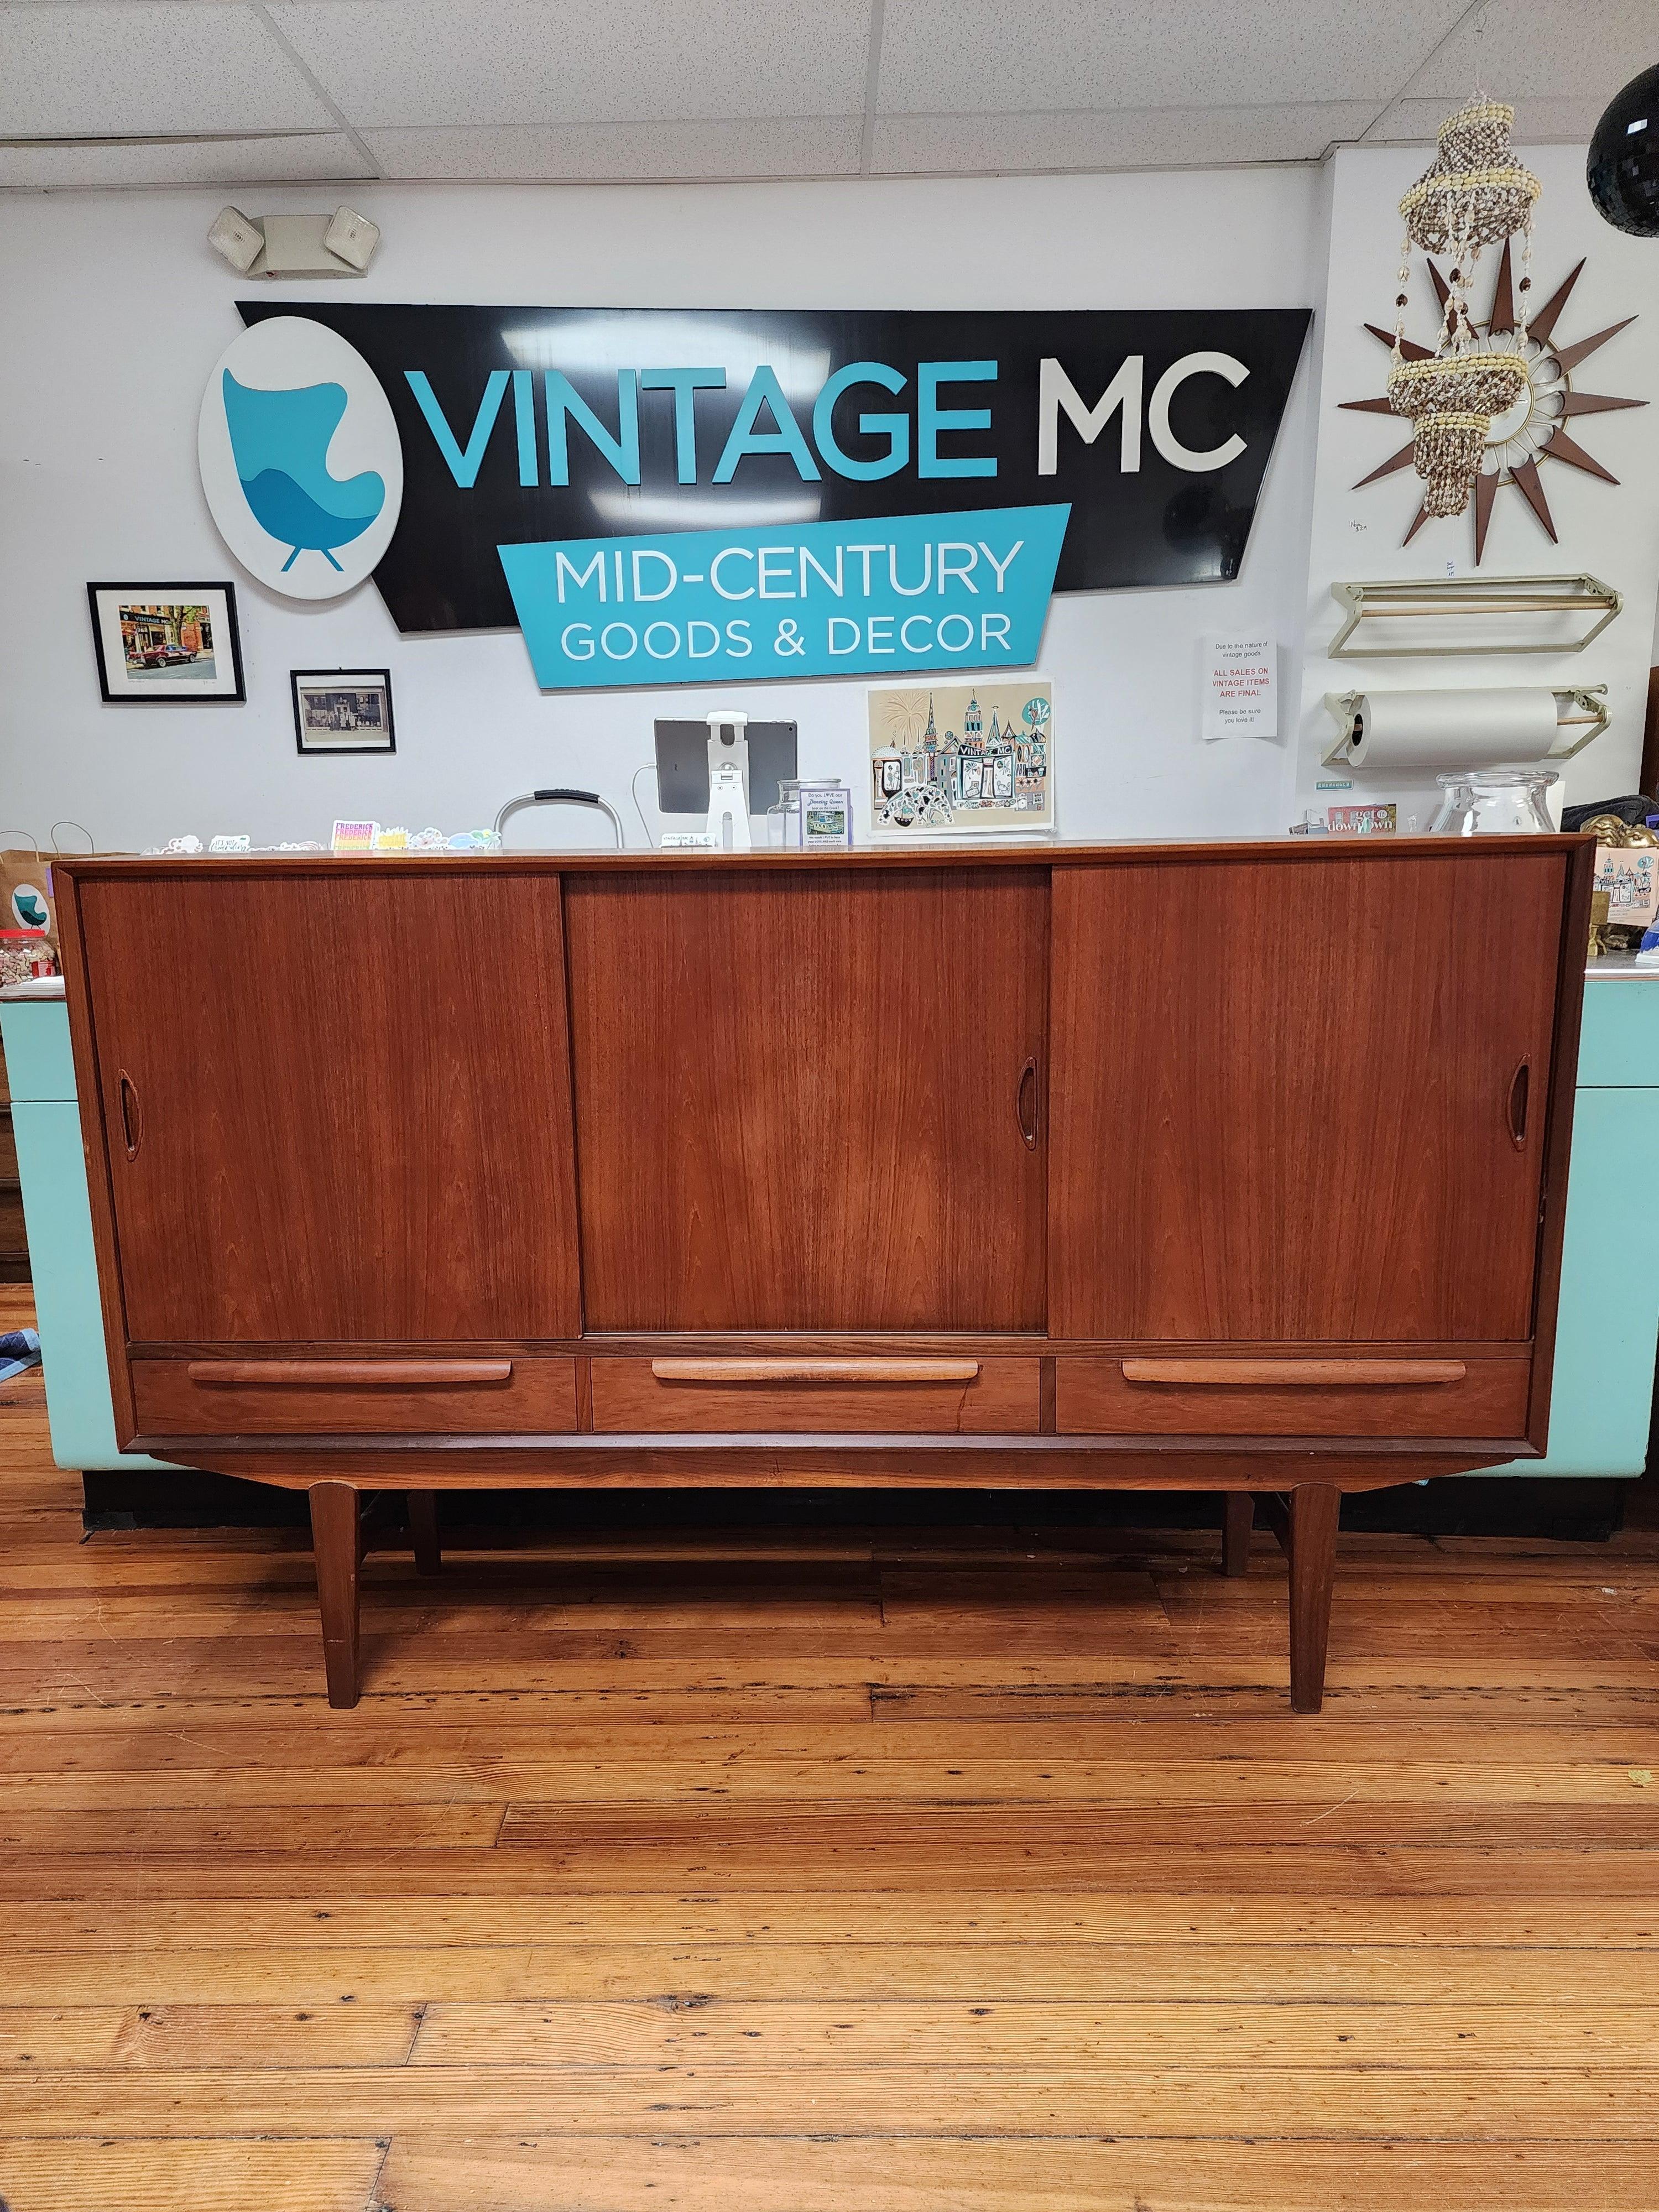 This beautiful vintage Danish teak tall sideboard has a lot of storage space. One of the coolest features of this piece is the mirrored back behind the middle section for your Barware storage. 
This item was purchased in Denmark from the original